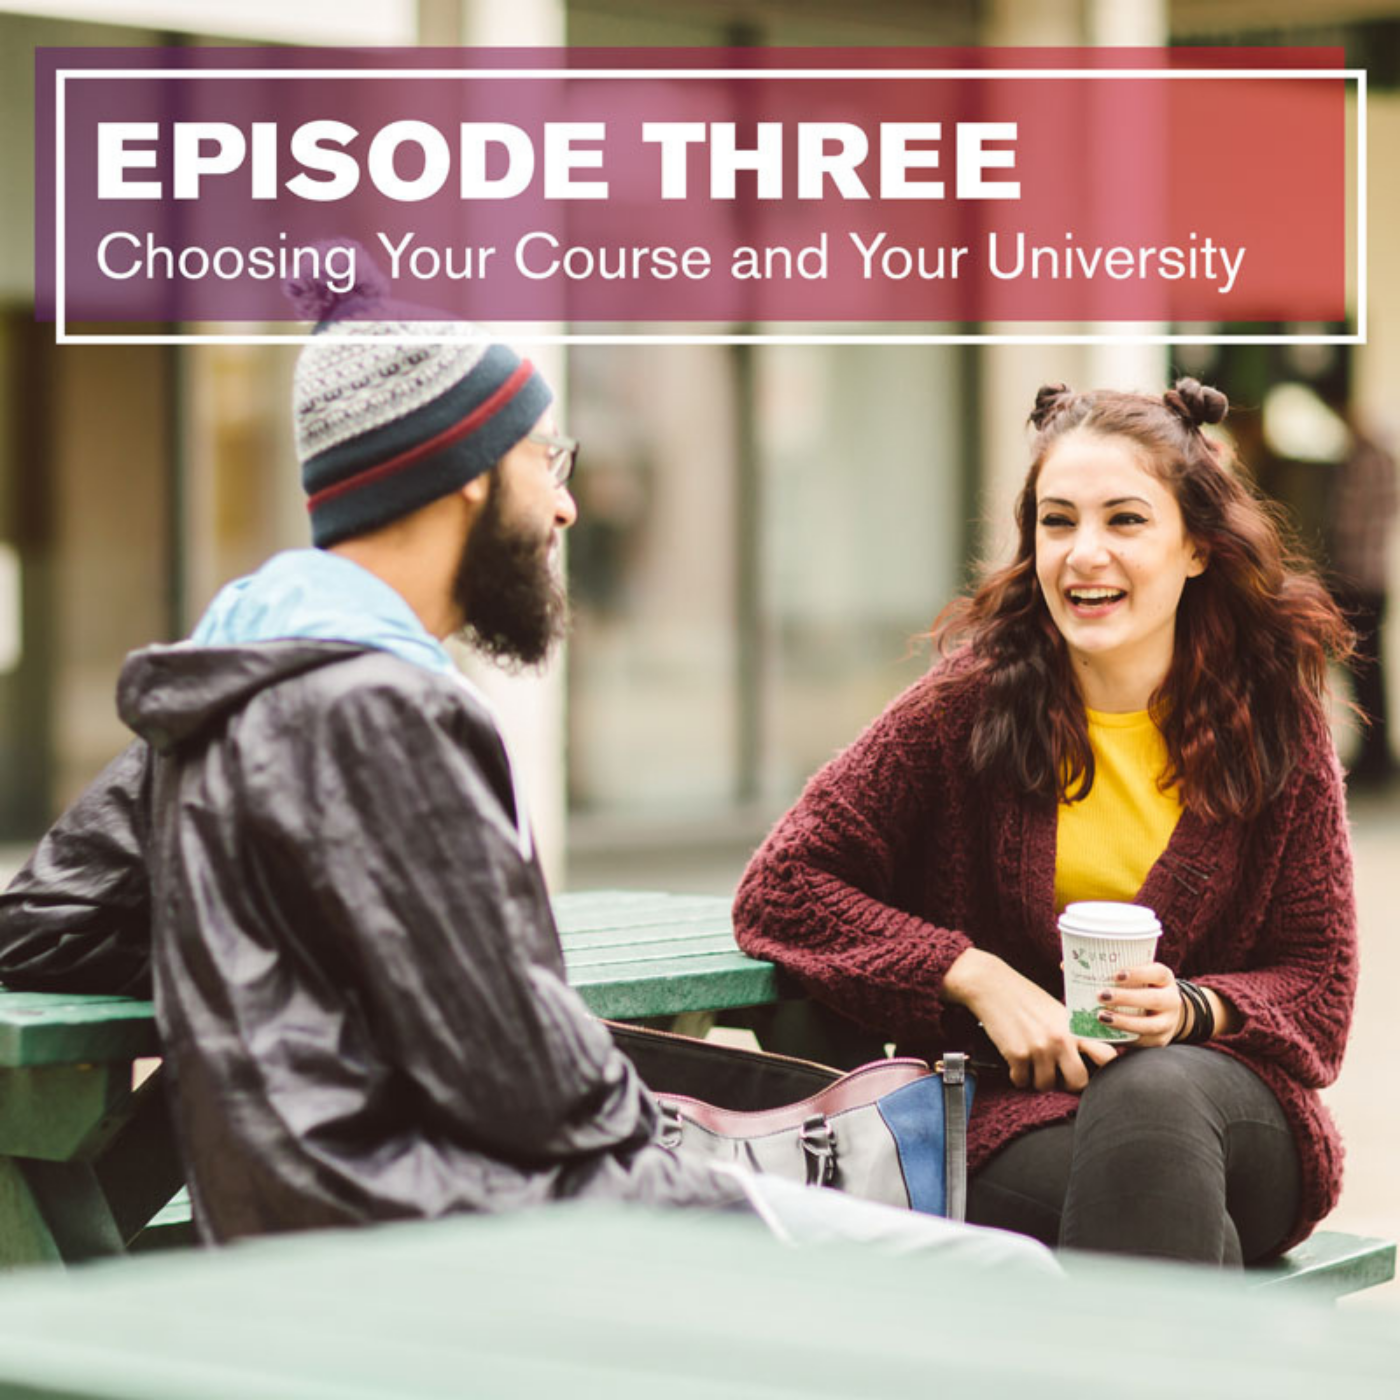 Choosing Your Course and Your University